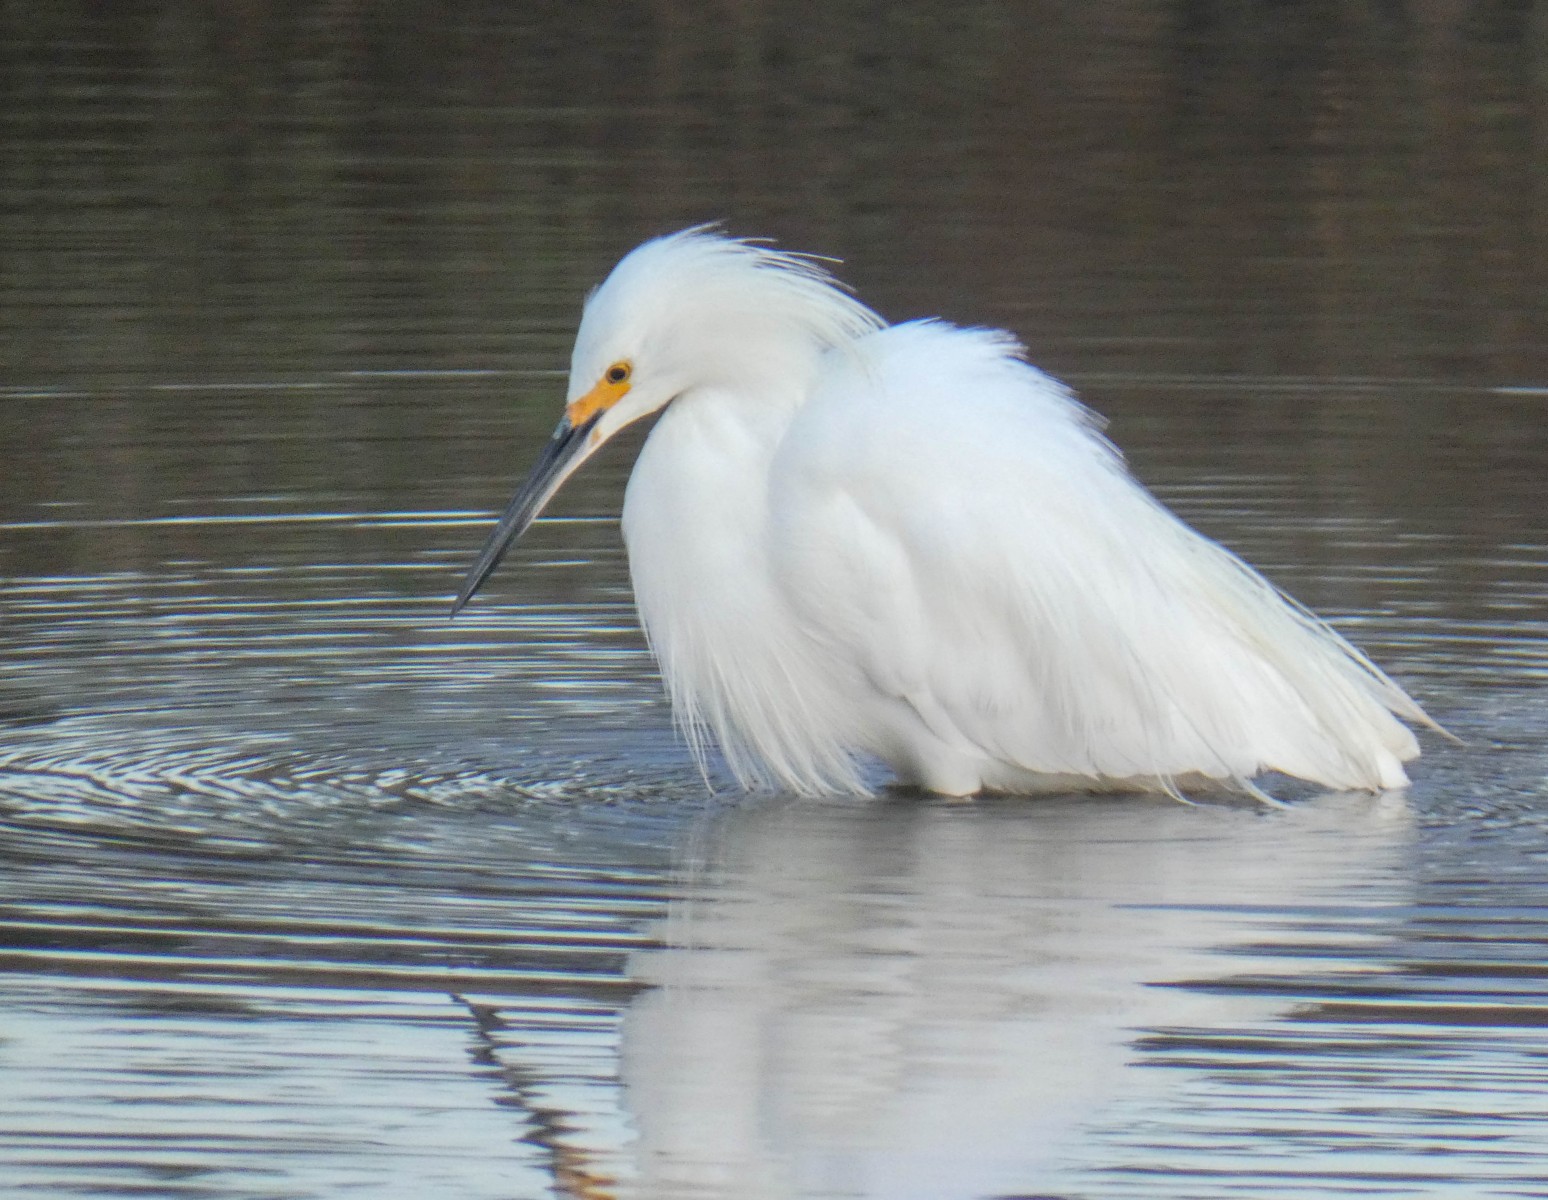 Snowy Egret challenges the deep end.